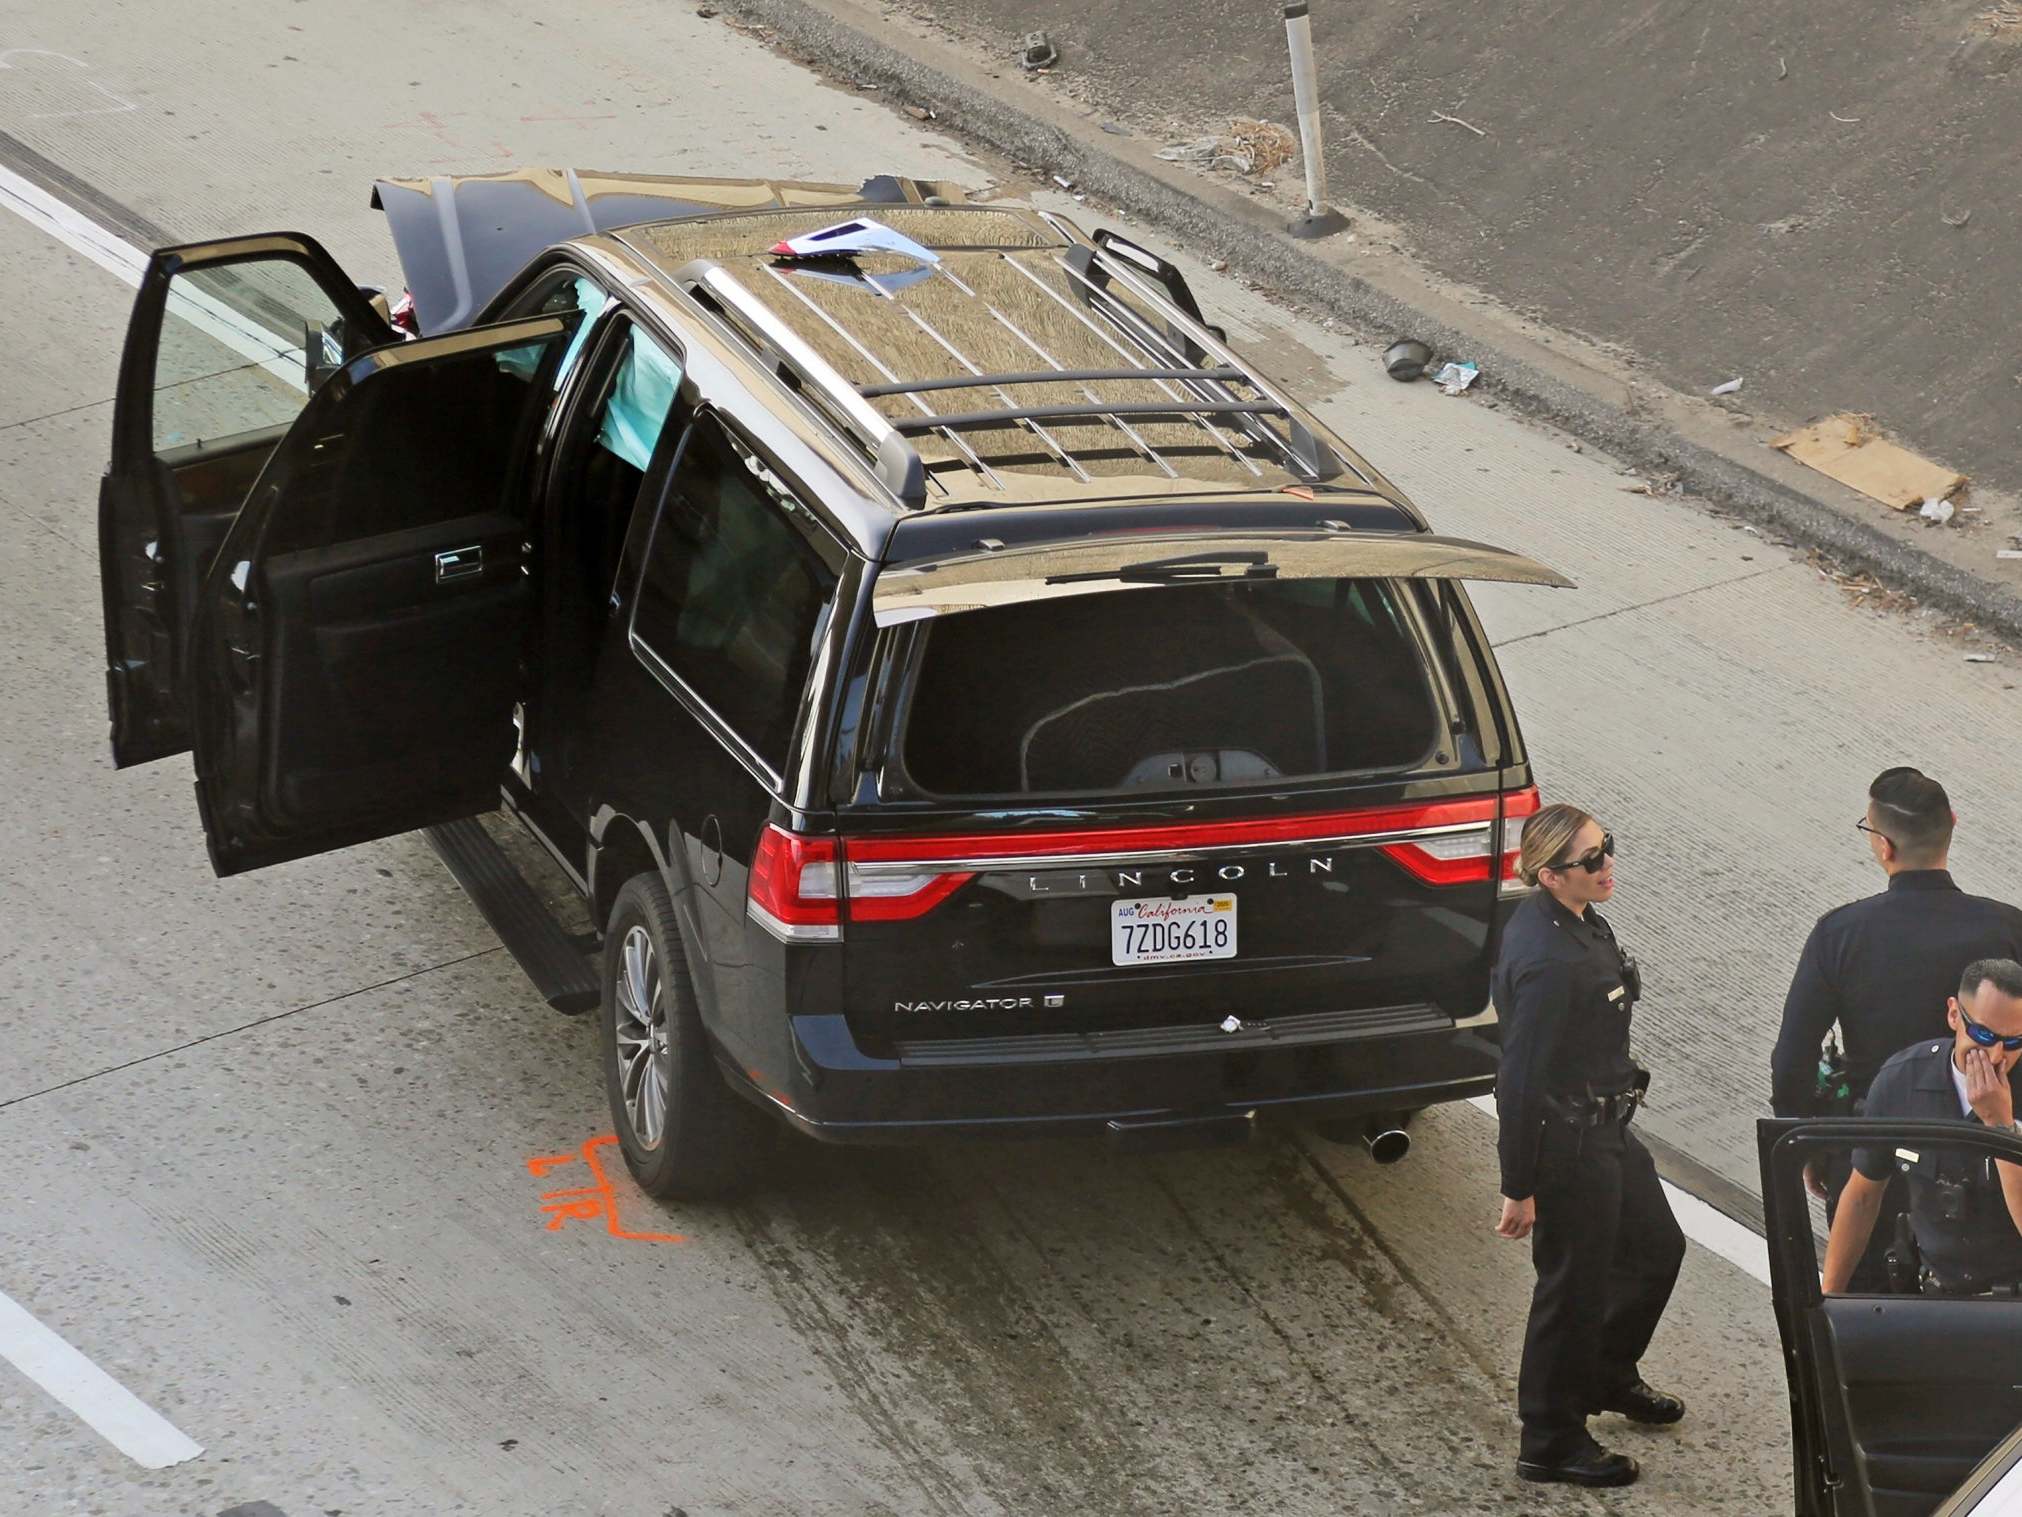 Los Angeles police officers chased down the stolen hearse on Interstate 110 in South Los Angeles